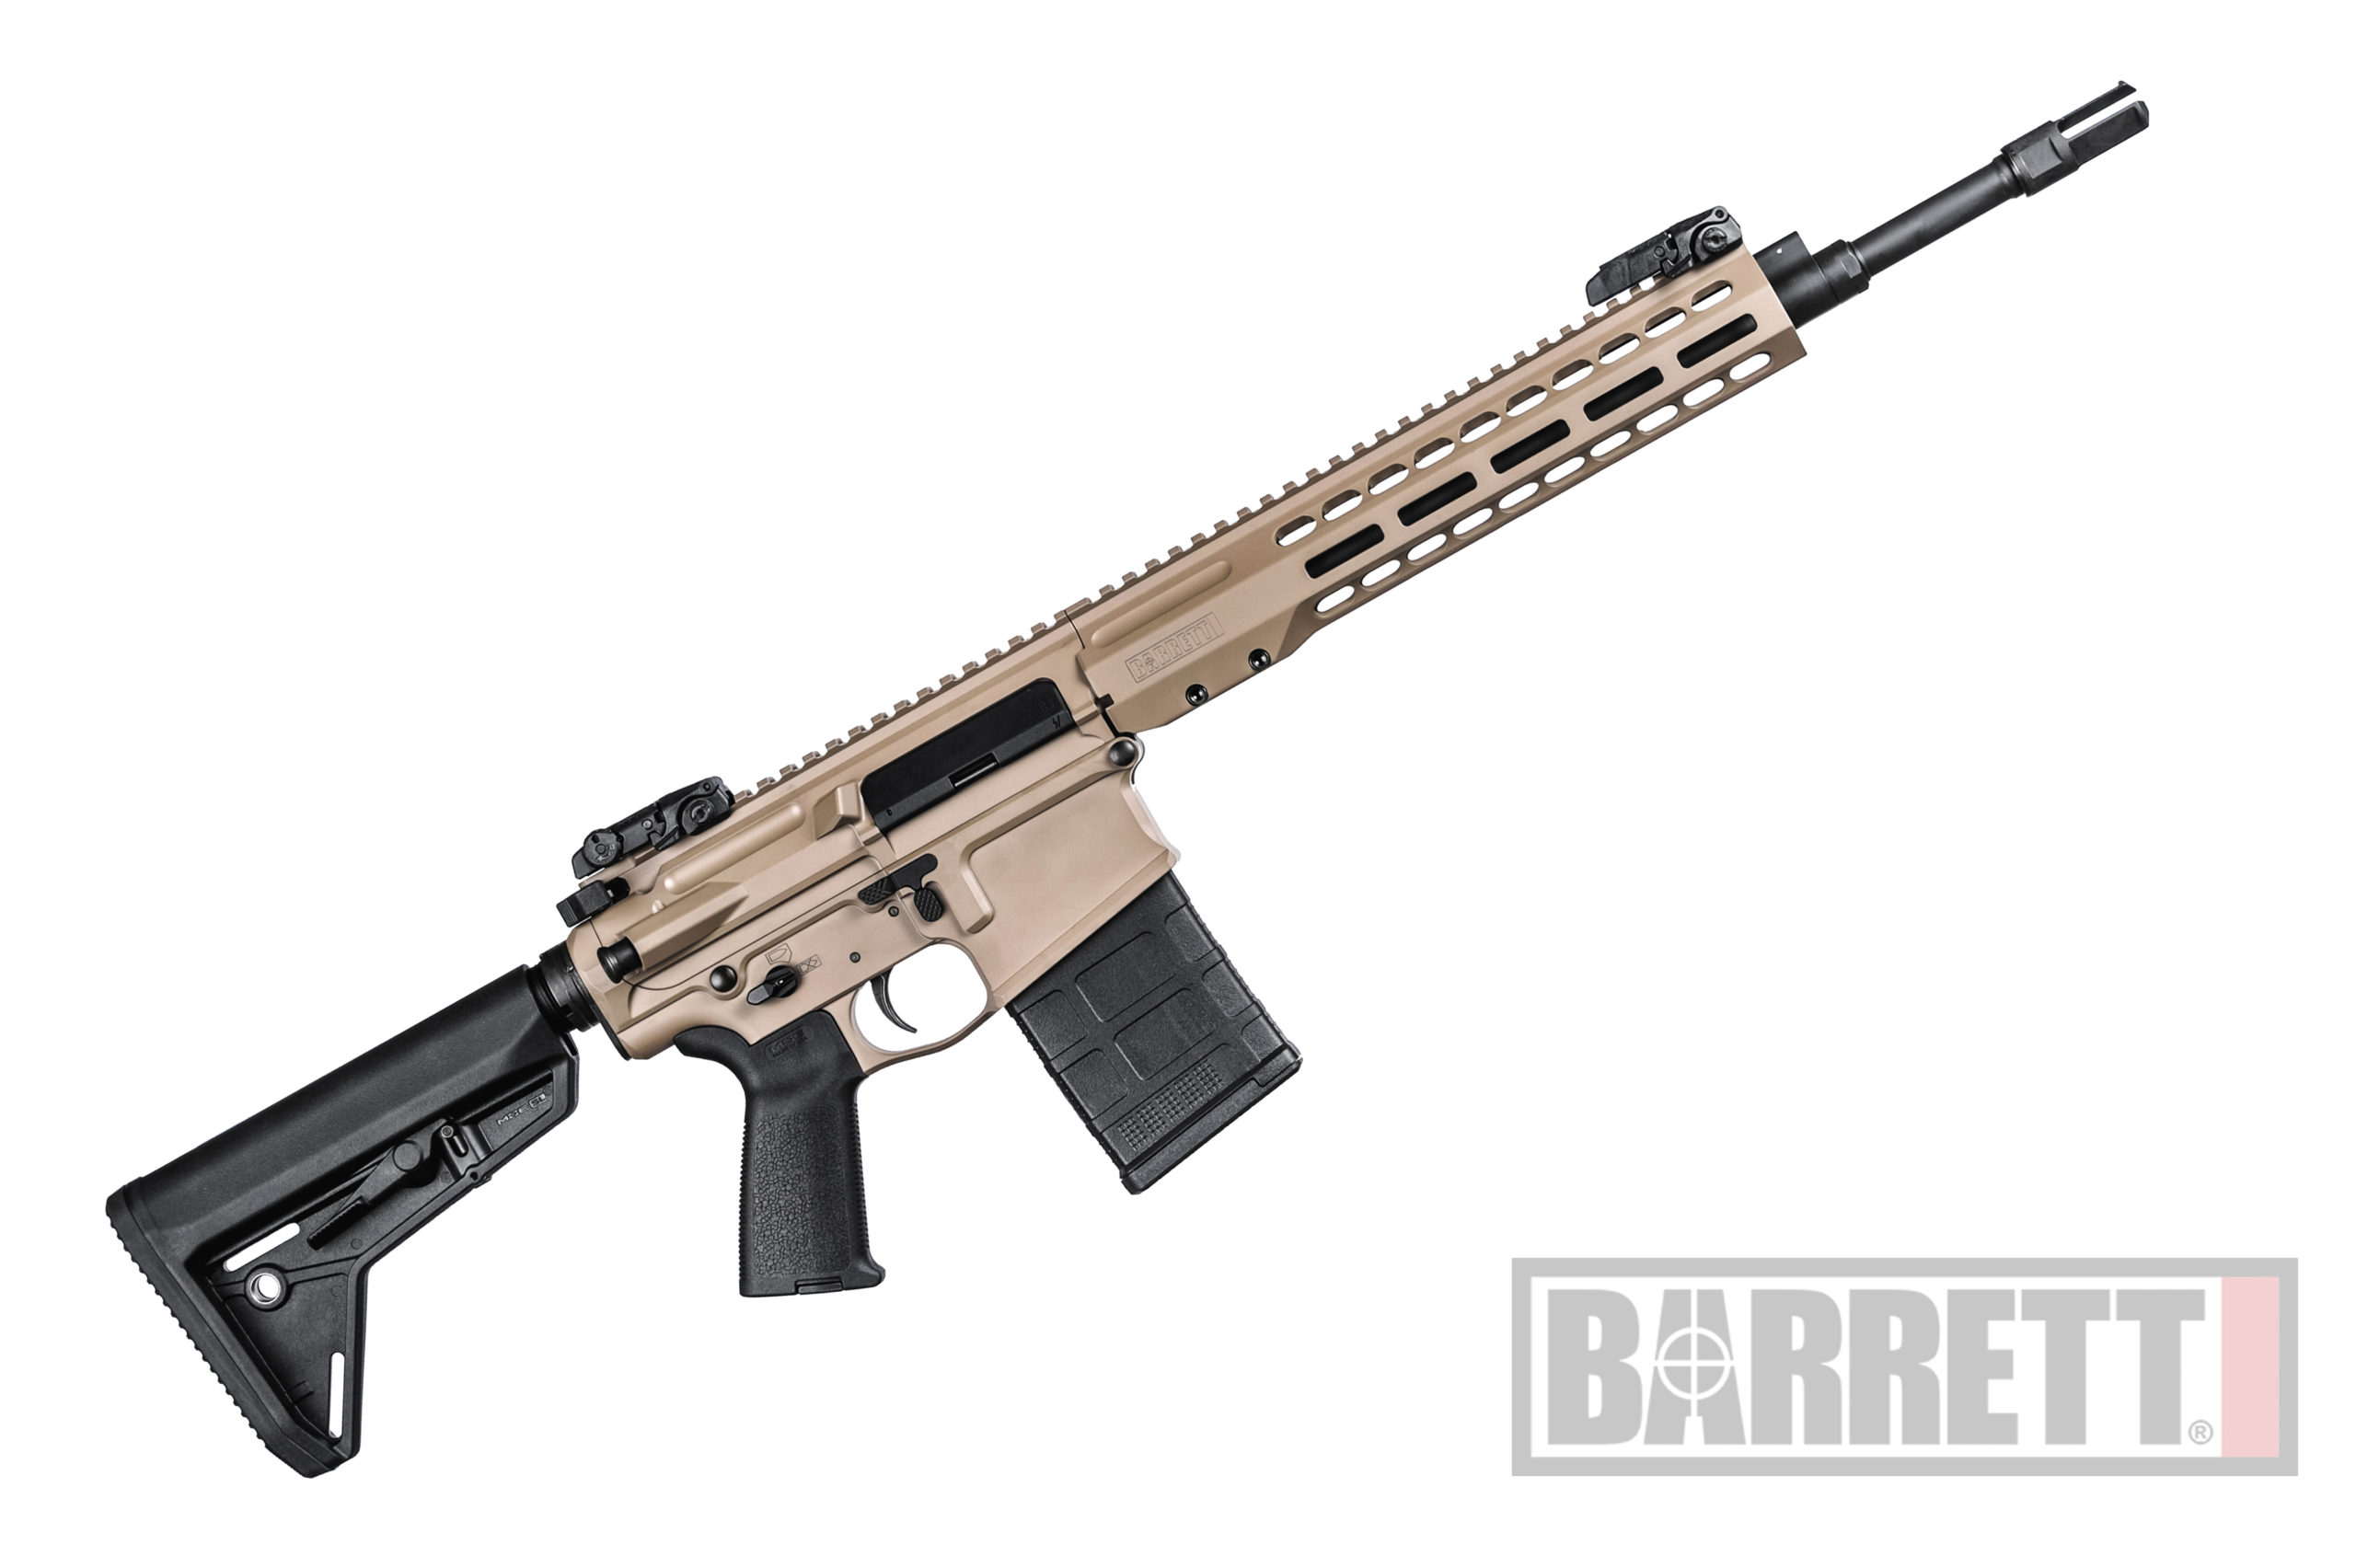 15-facts-about-barrett-firearms-manufacturing